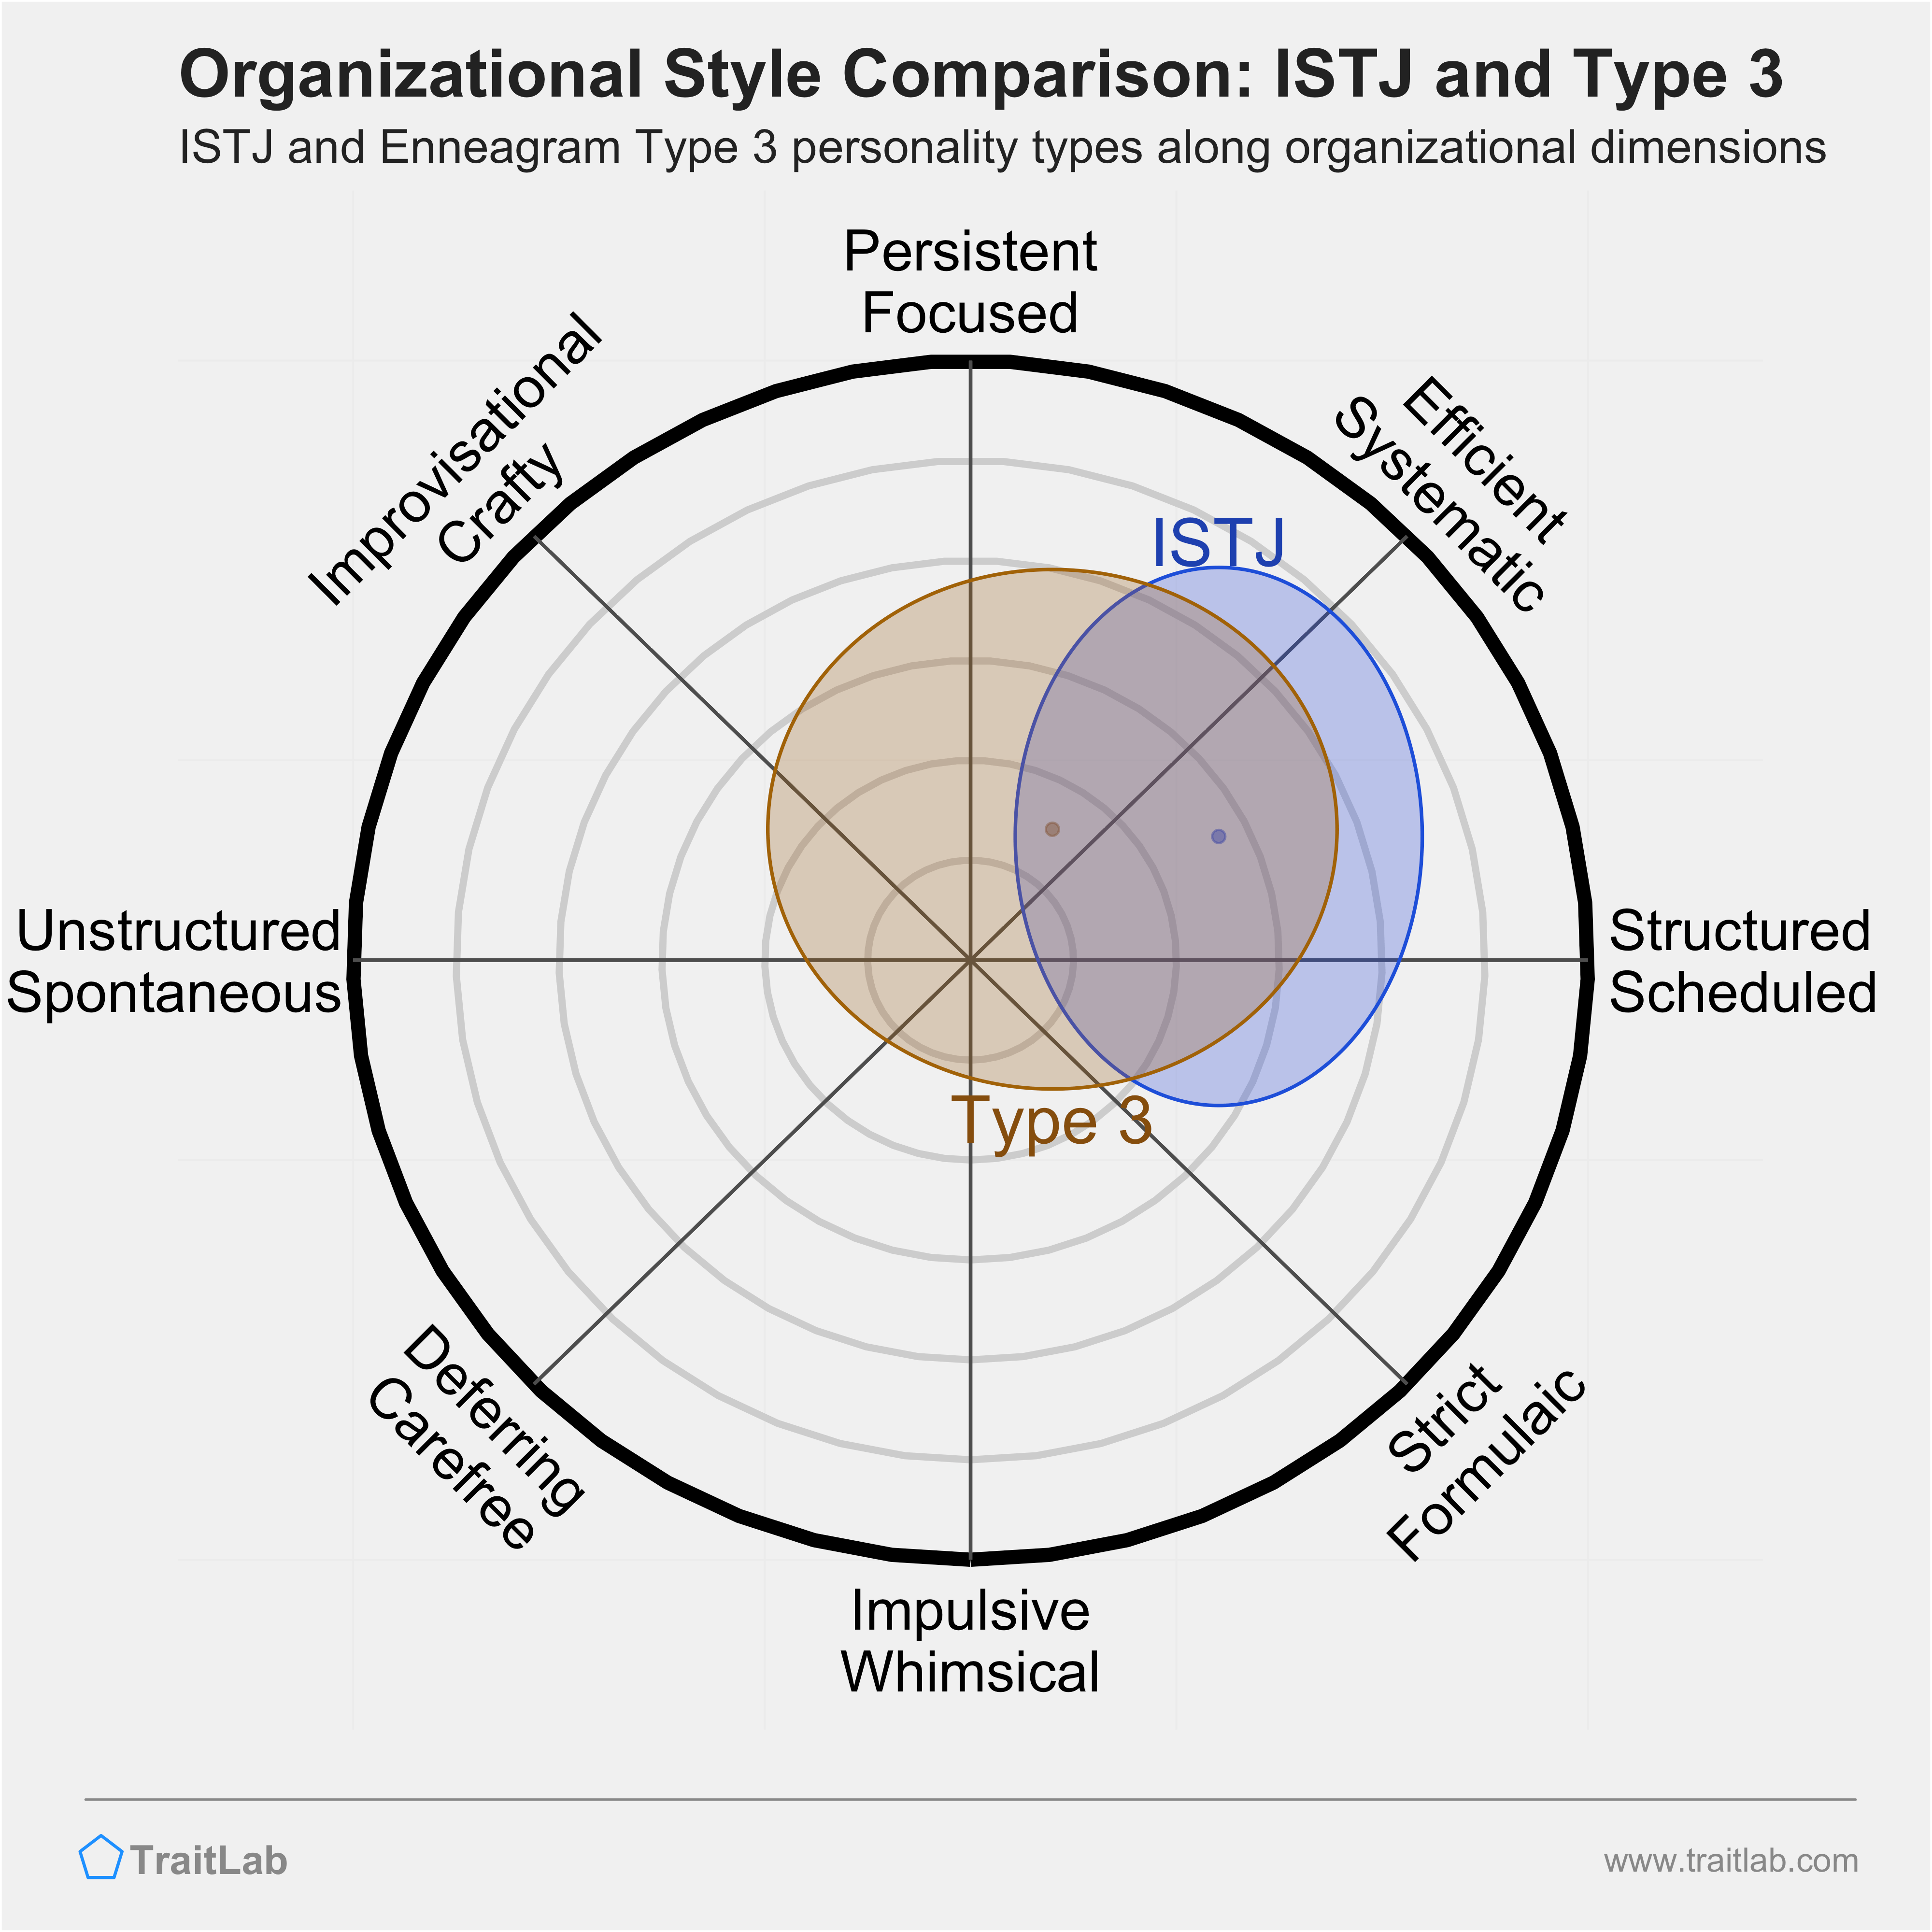 ISTJ and Type 3 comparison across organizational dimensions